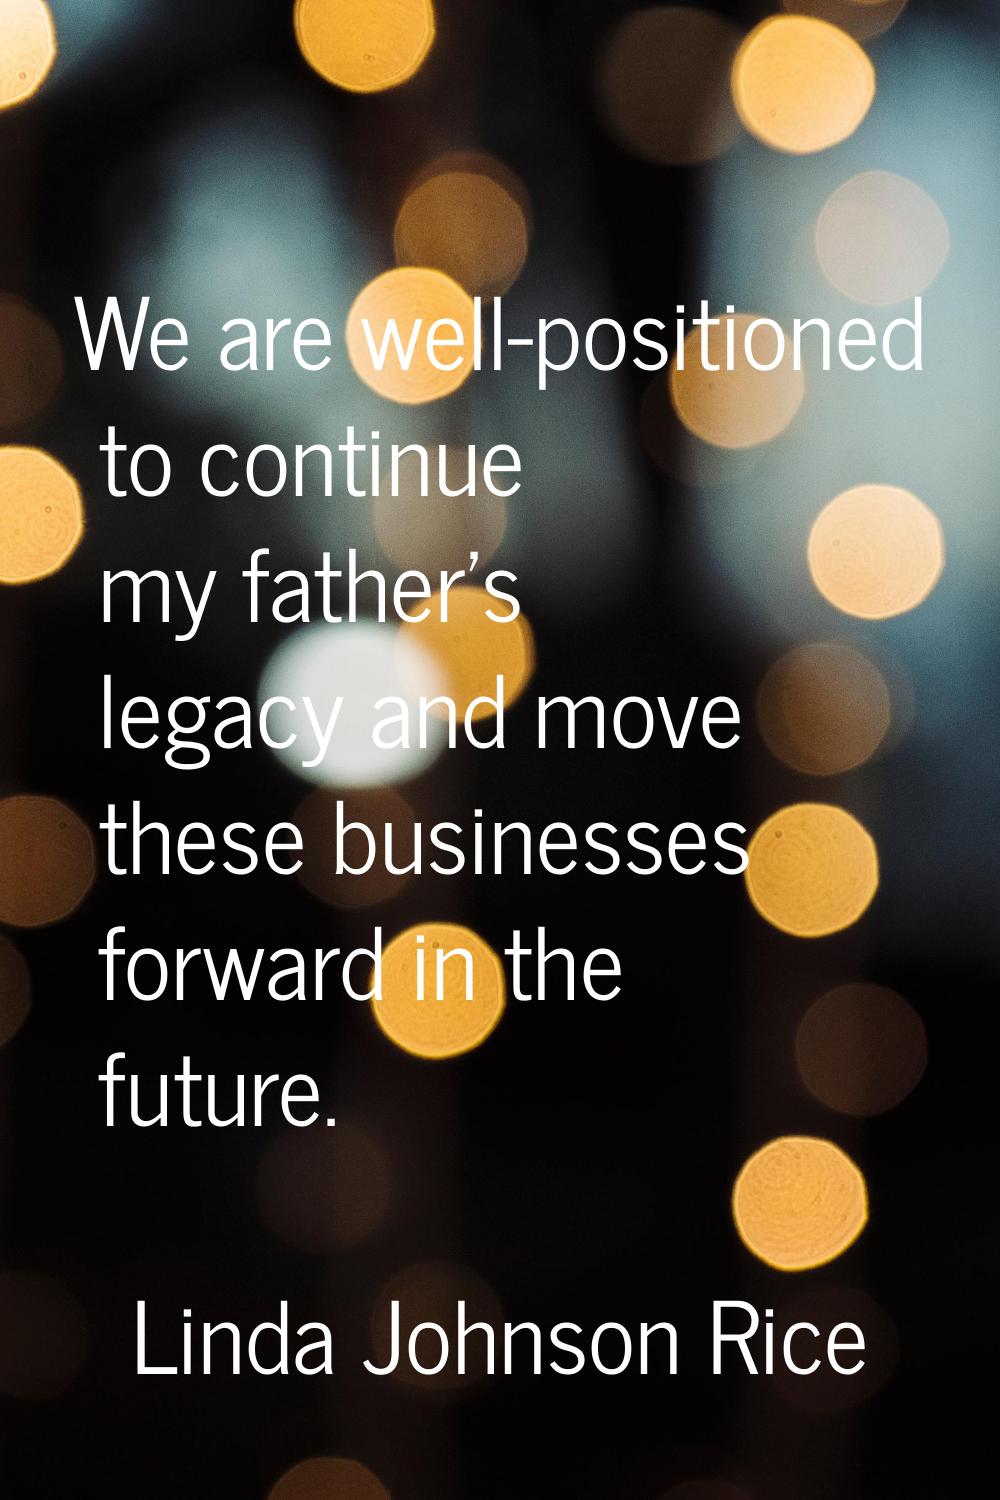 We are well-positioned to continue my father's legacy and move these businesses forward in the futu